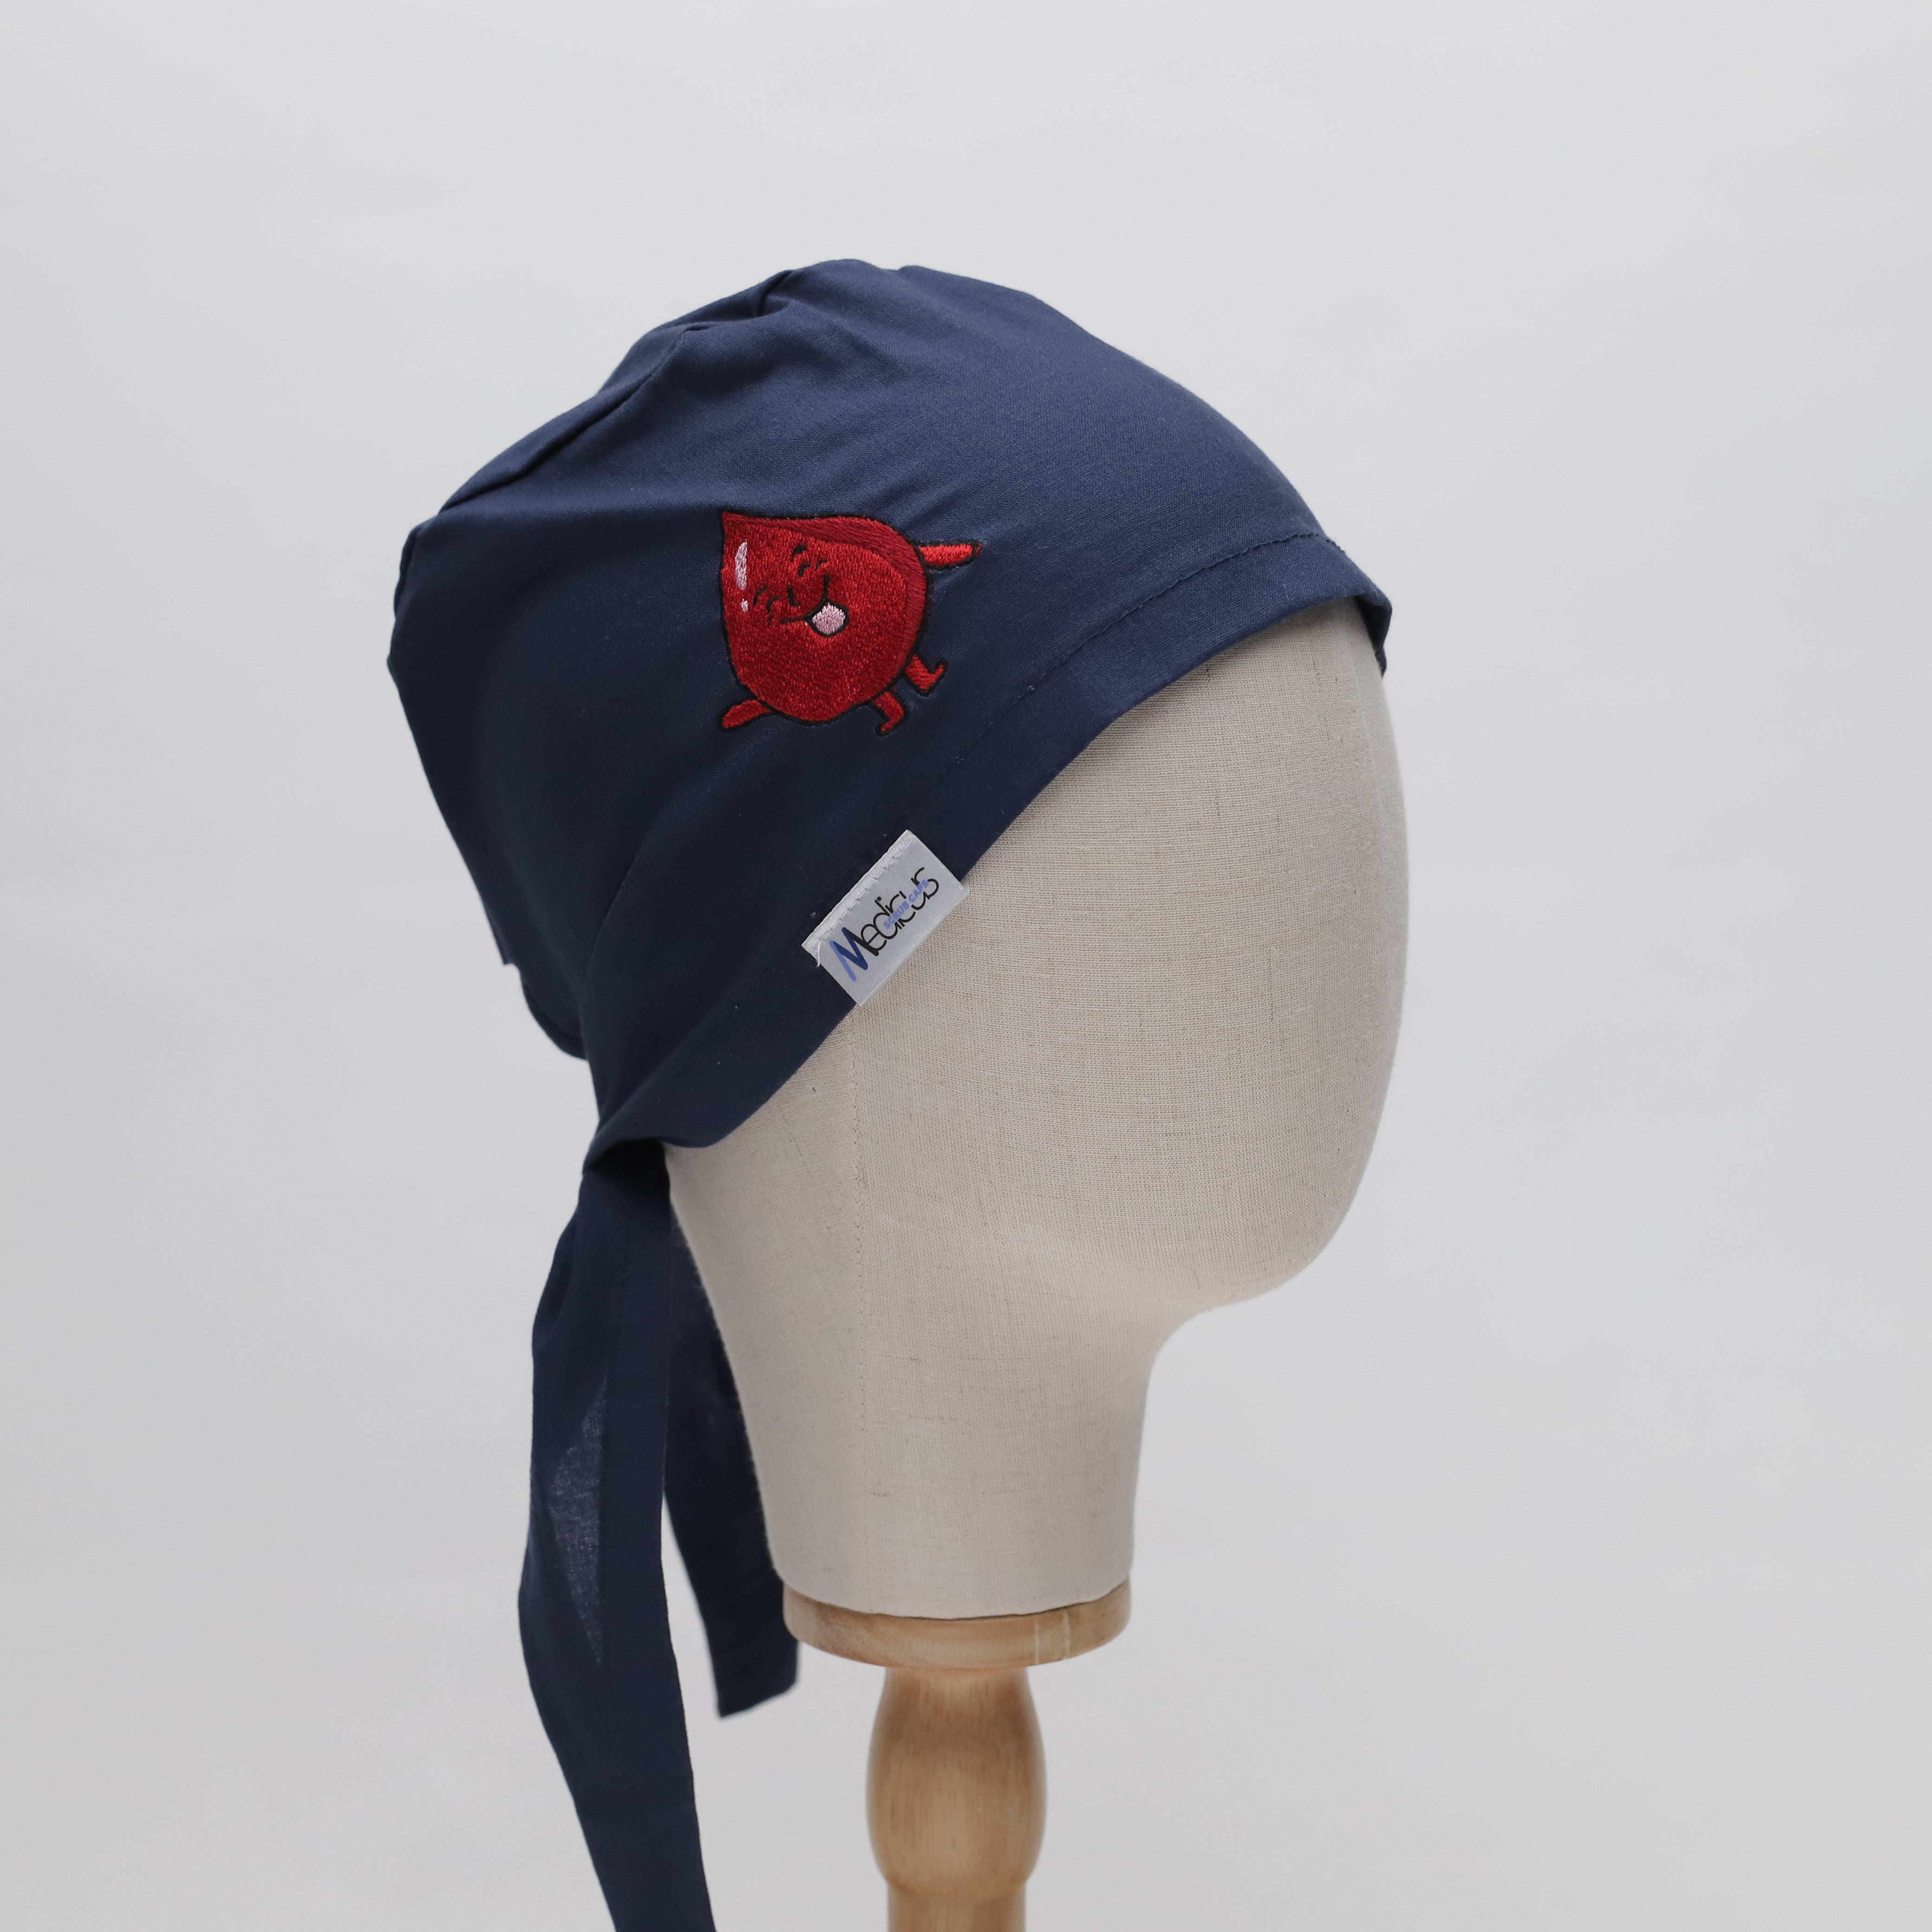 READY TO SHIP - NAVY with embroidered BLOOD DROP -  Bandana M/L Print Scrub Cap from Medicus Scrub Caps